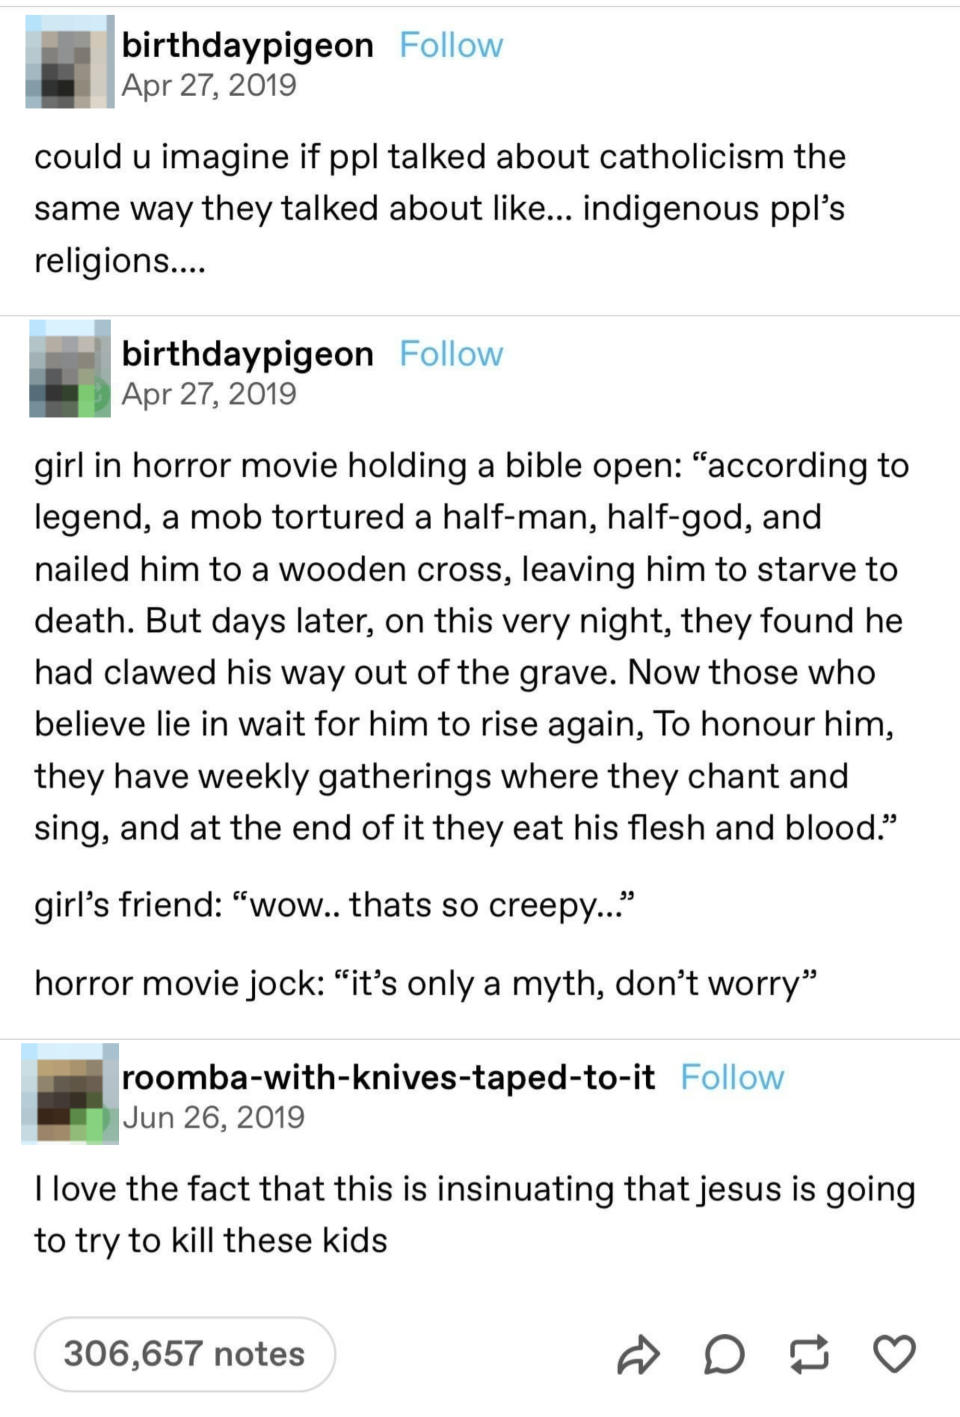 Image summary: A series of social media posts discussing a children's movie scene with religious undertones